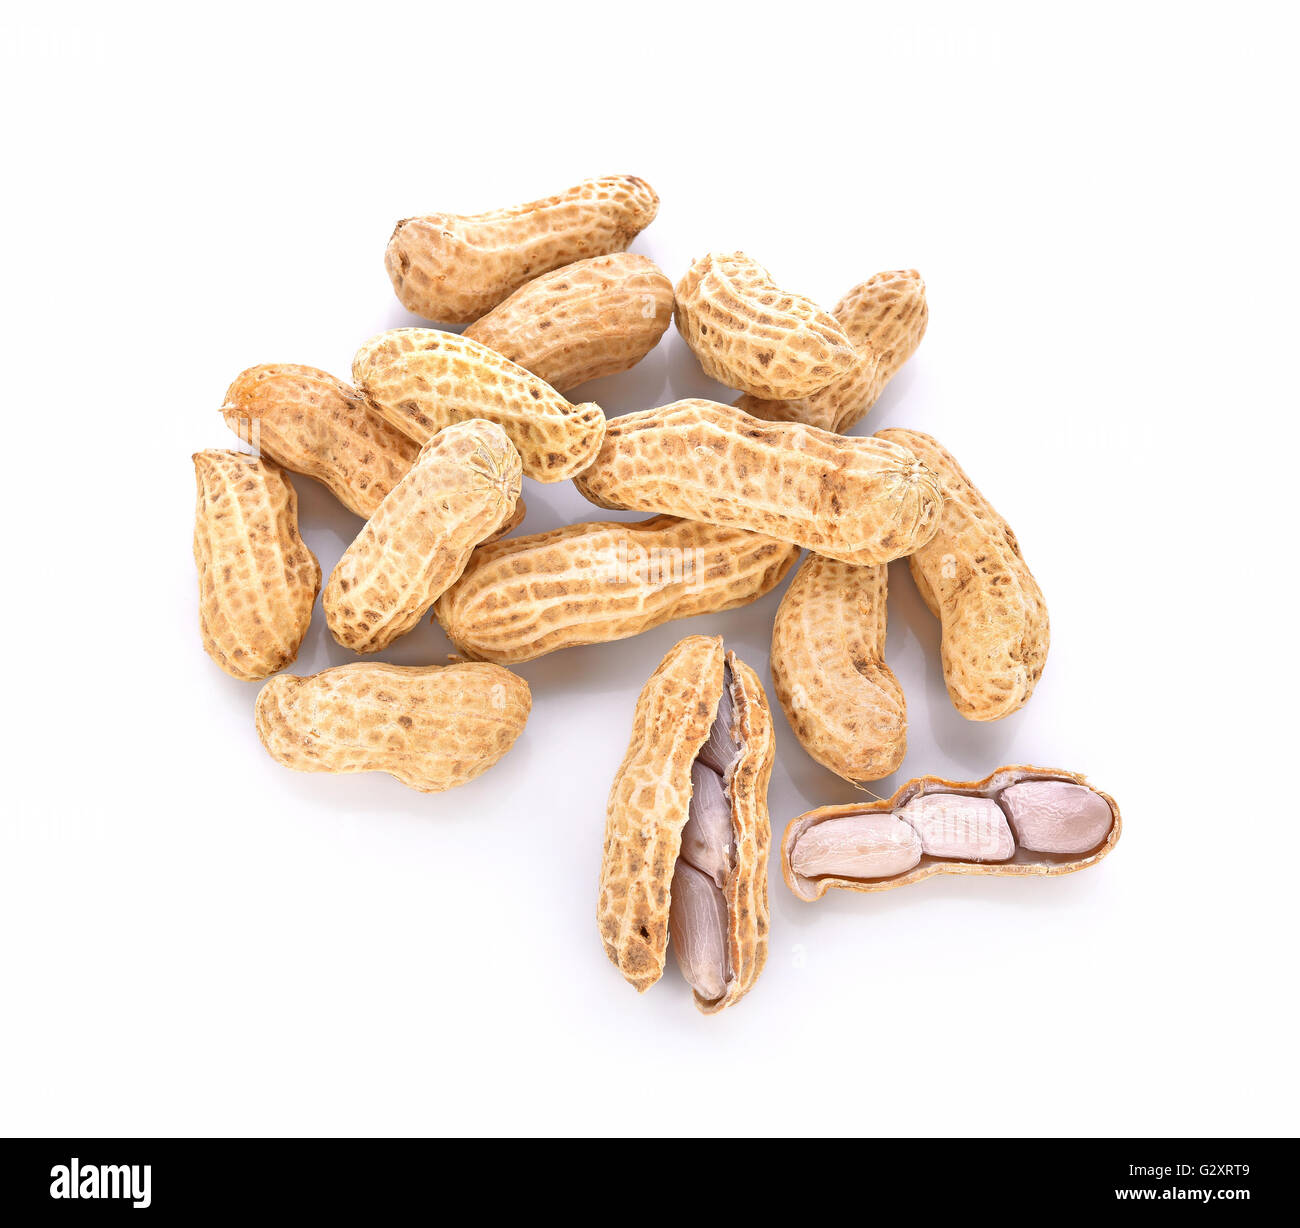 Boiled Peanuts on white background Stock Photo